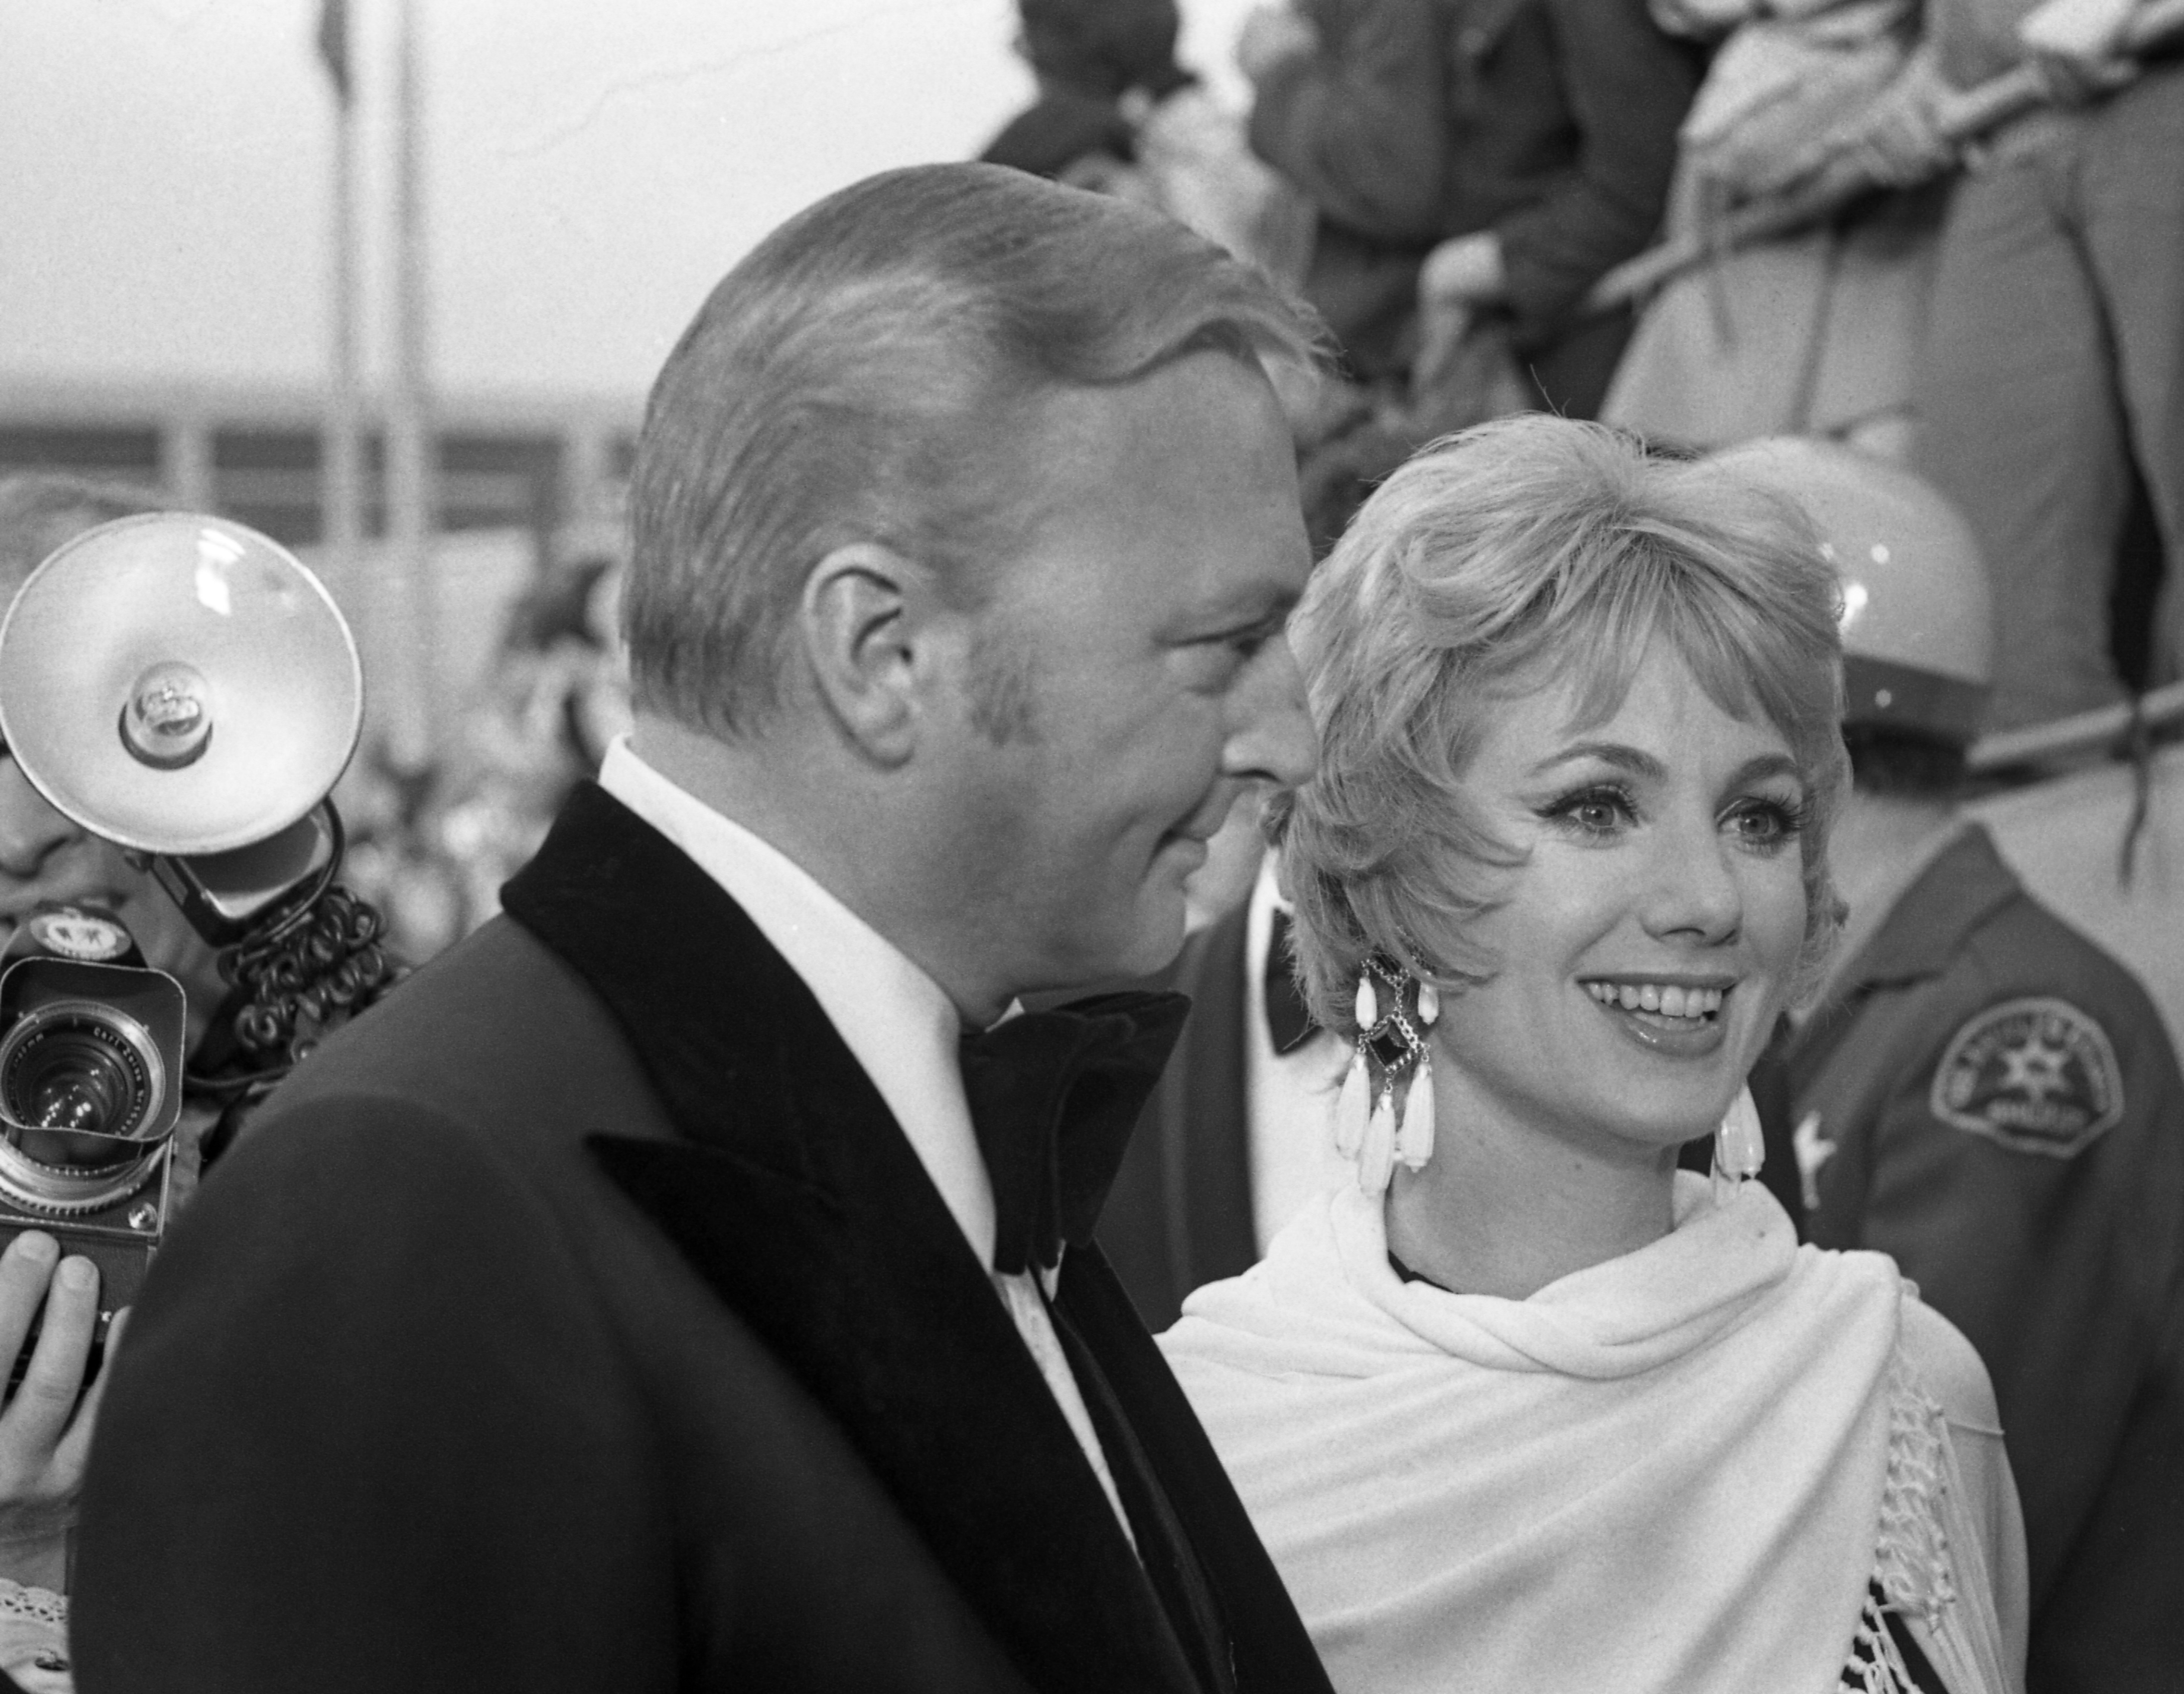 Jack Cassidy and Shirley Jones arrive at the 43rd Annual Academy Awards on April 15, 1971. | Source: Bettmann Archive/Getty Images